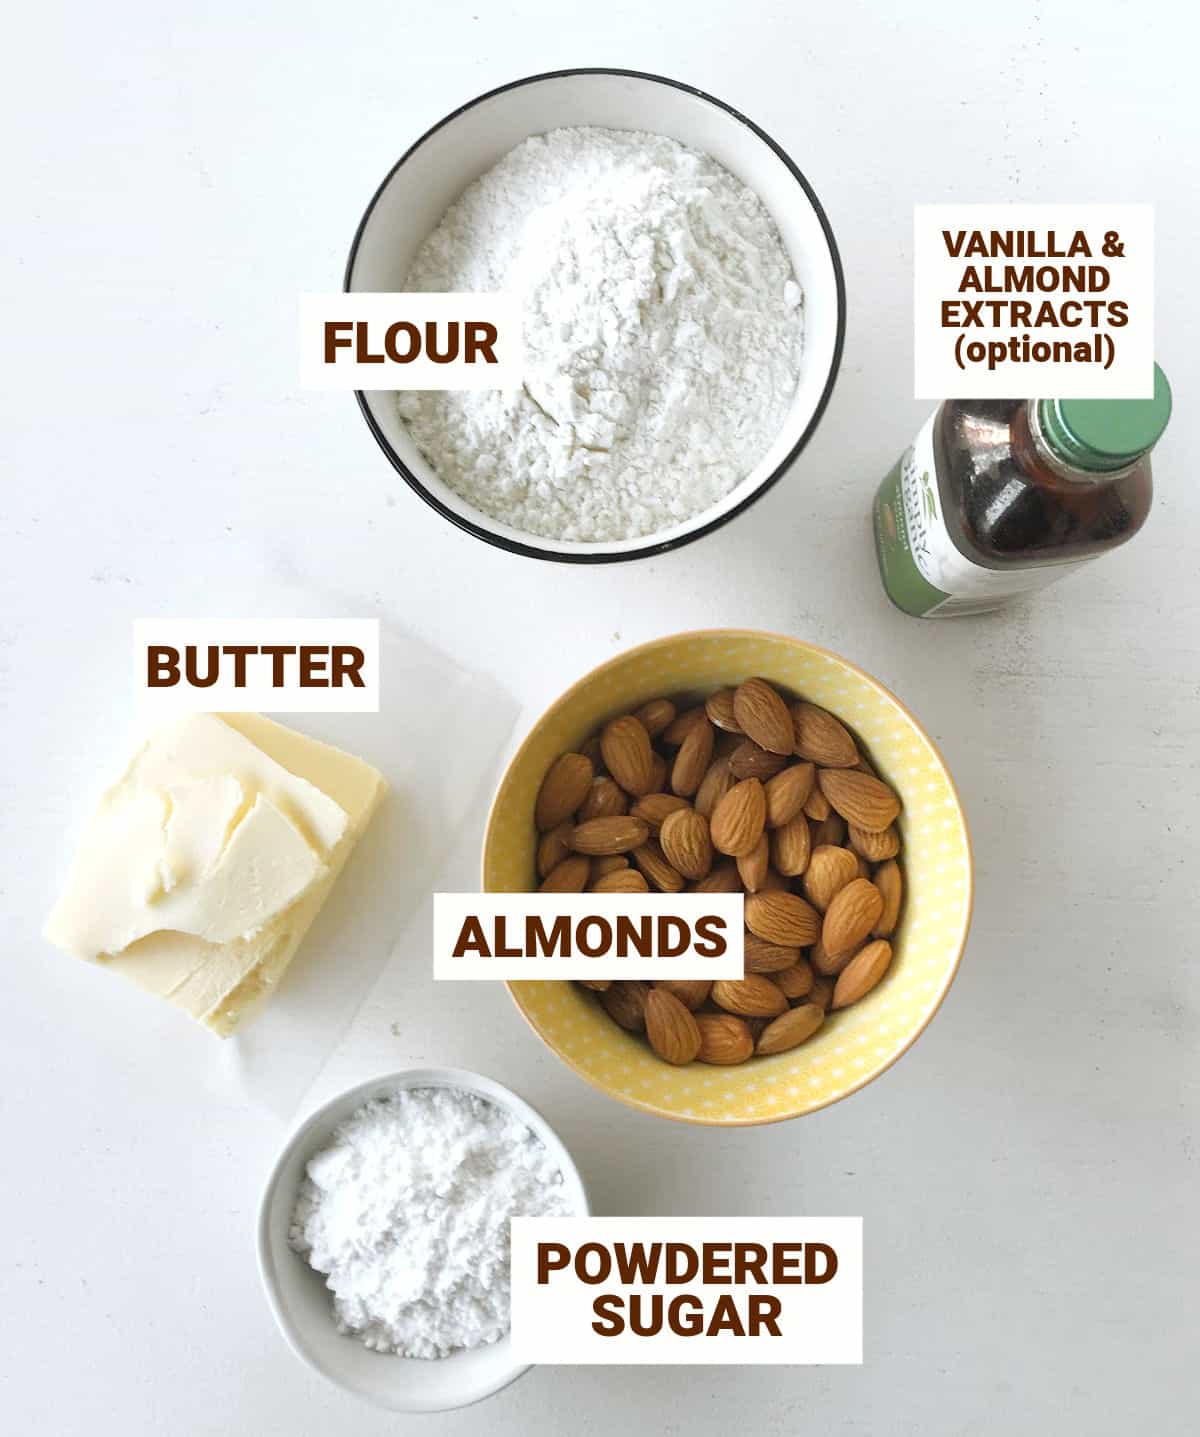 Bowls with almonds, flour, sugar, chunk of butter and a small bottle on a white surface.